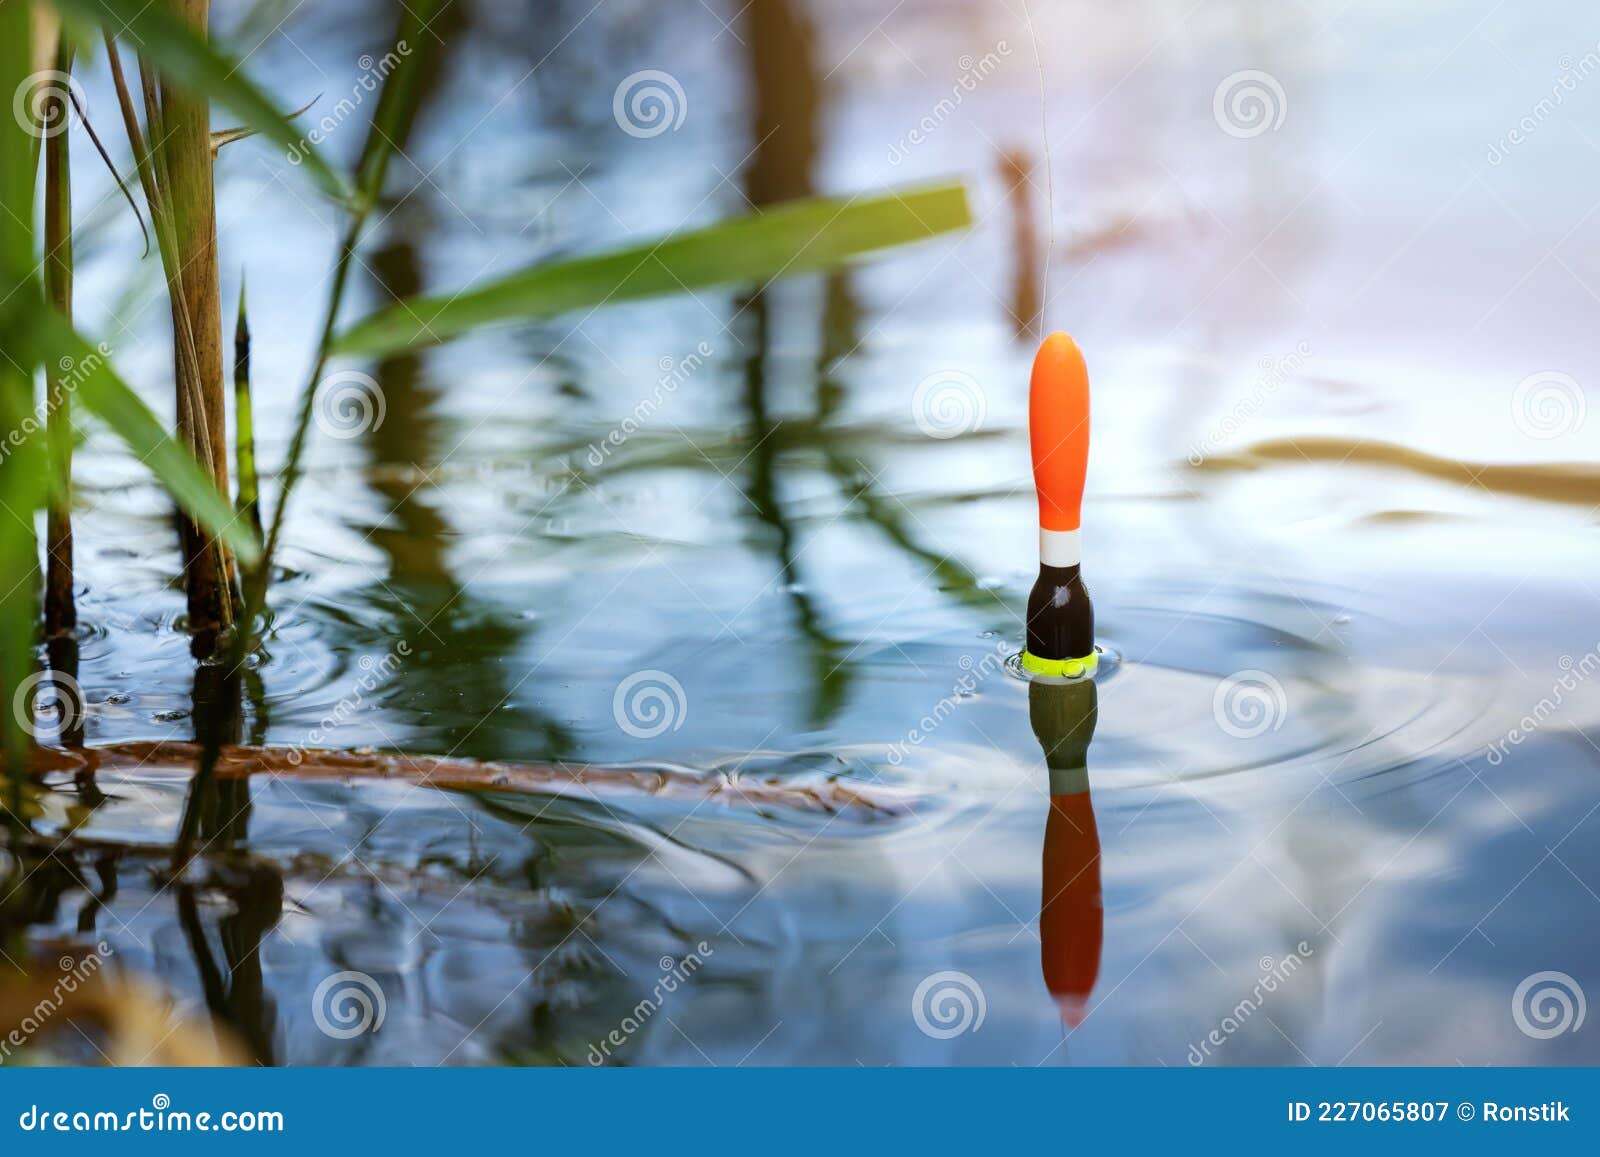 angling - fishing float in the pond water. catch the fish